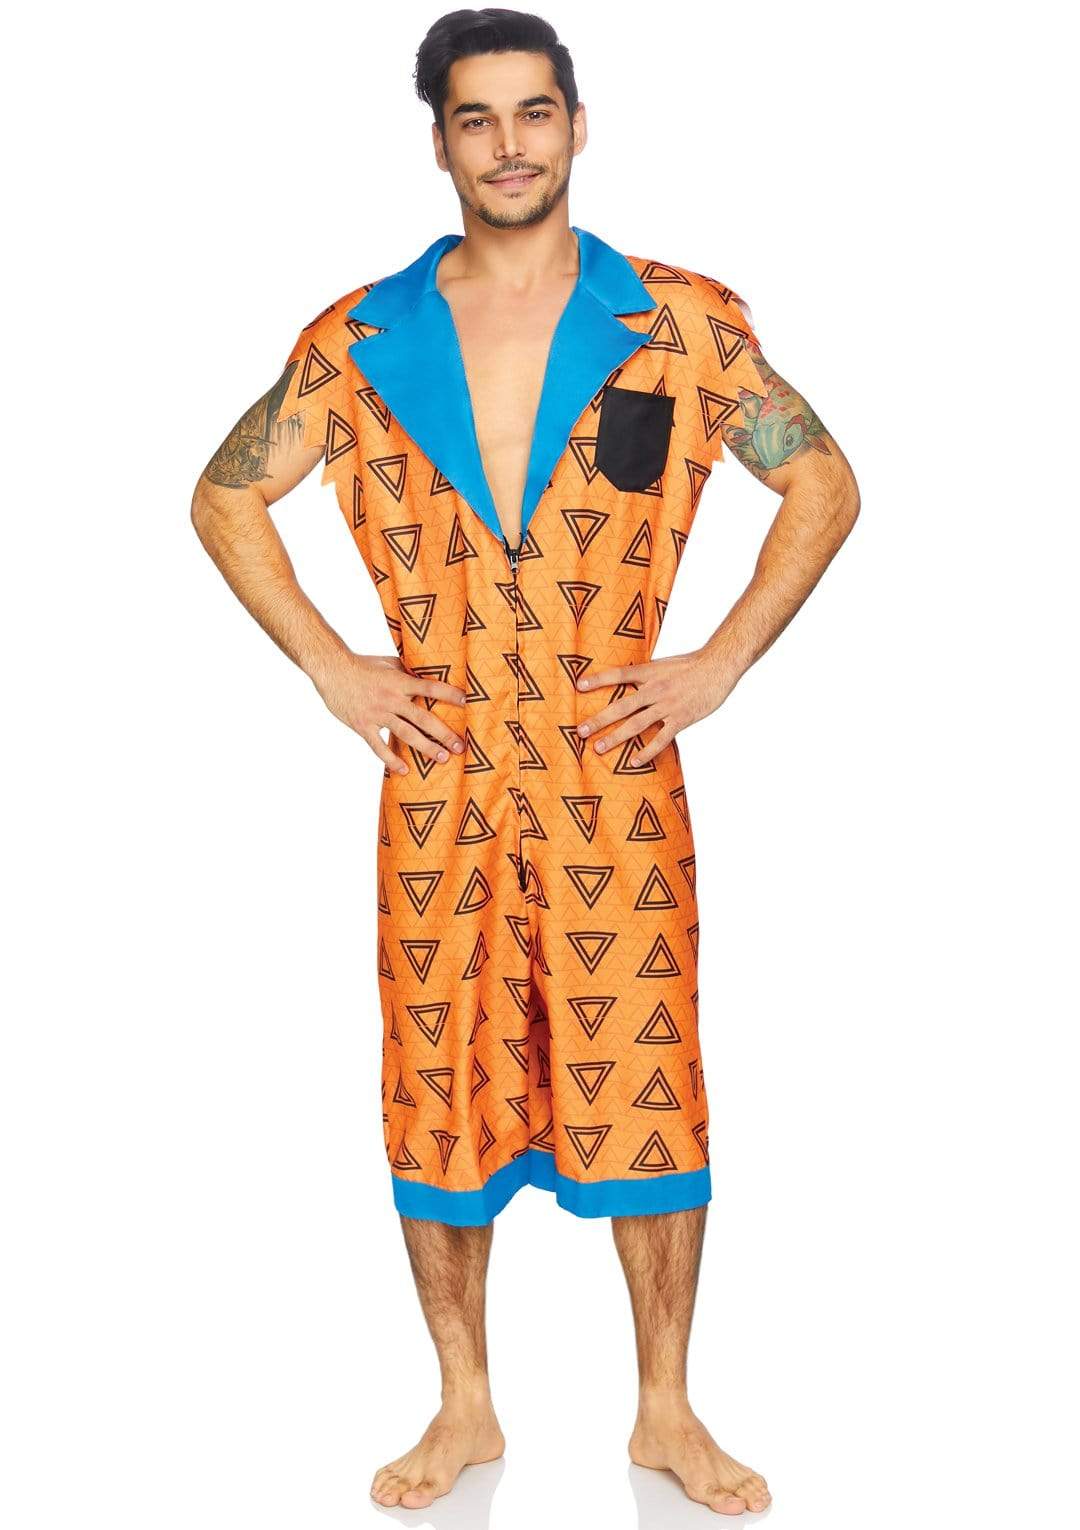 Bedrock Bro Shorts Jumpsuit with Pockets